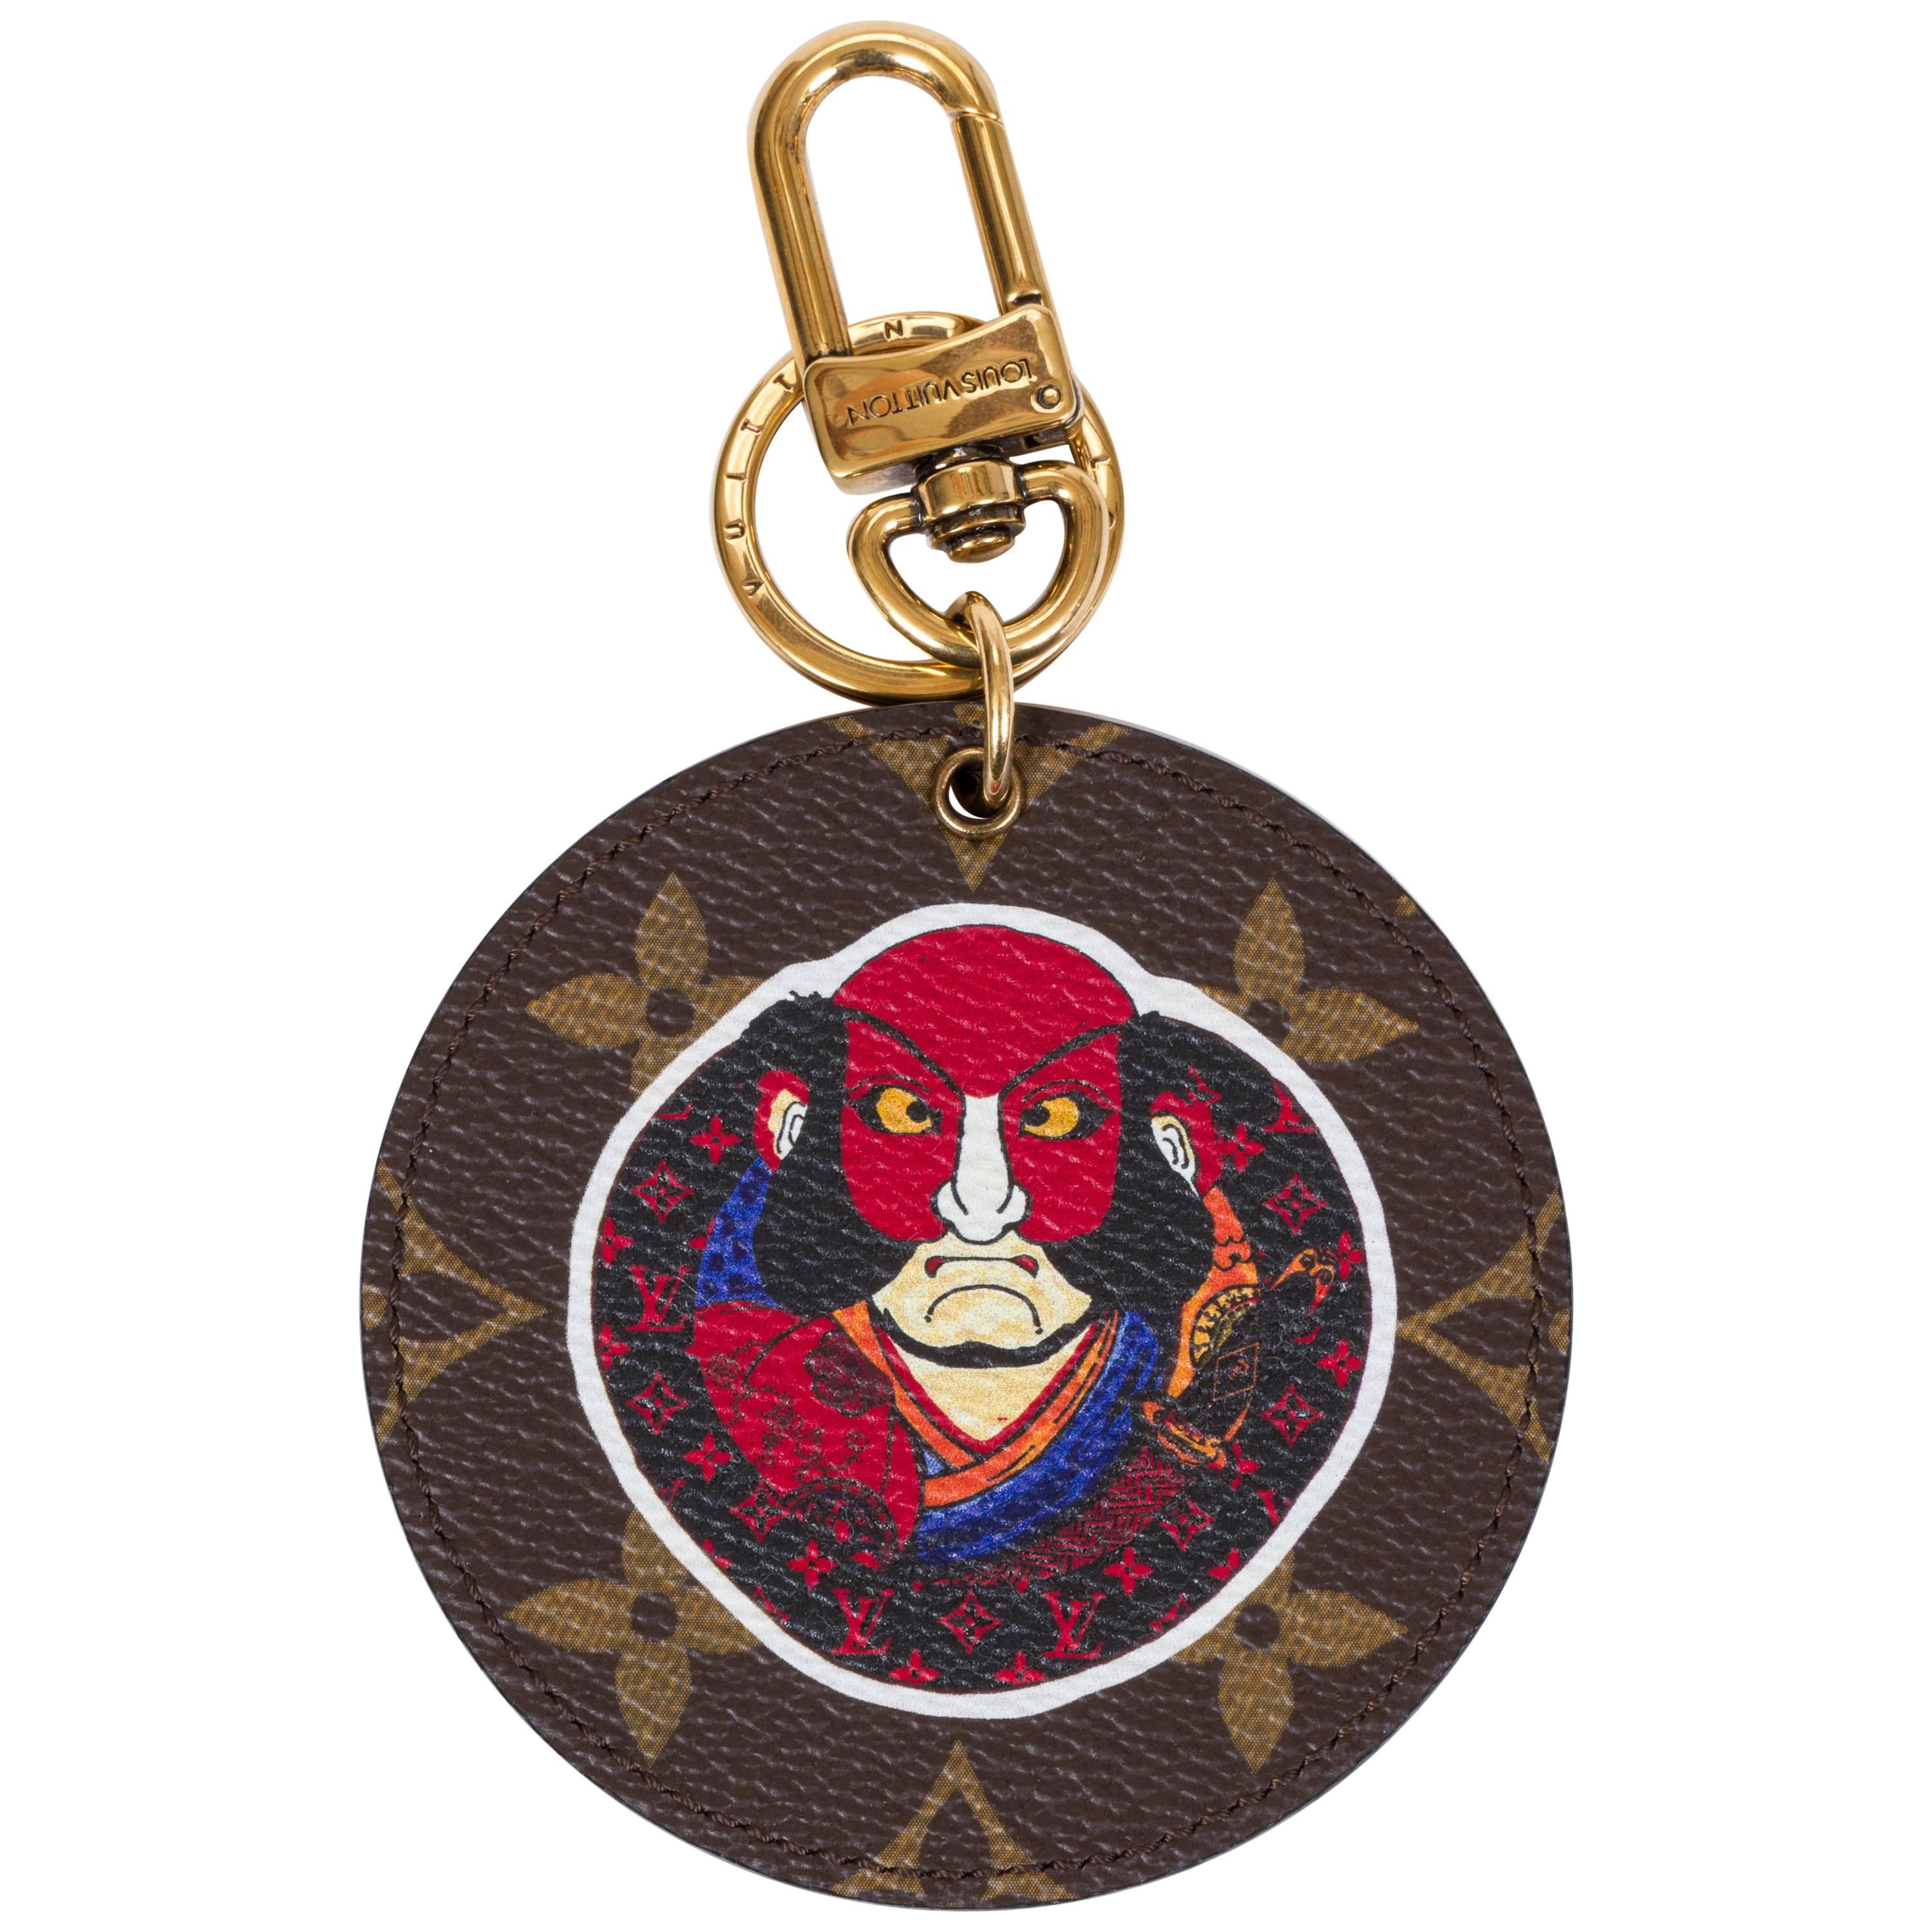 New Vuitton Kabuki Sold Out Keychain